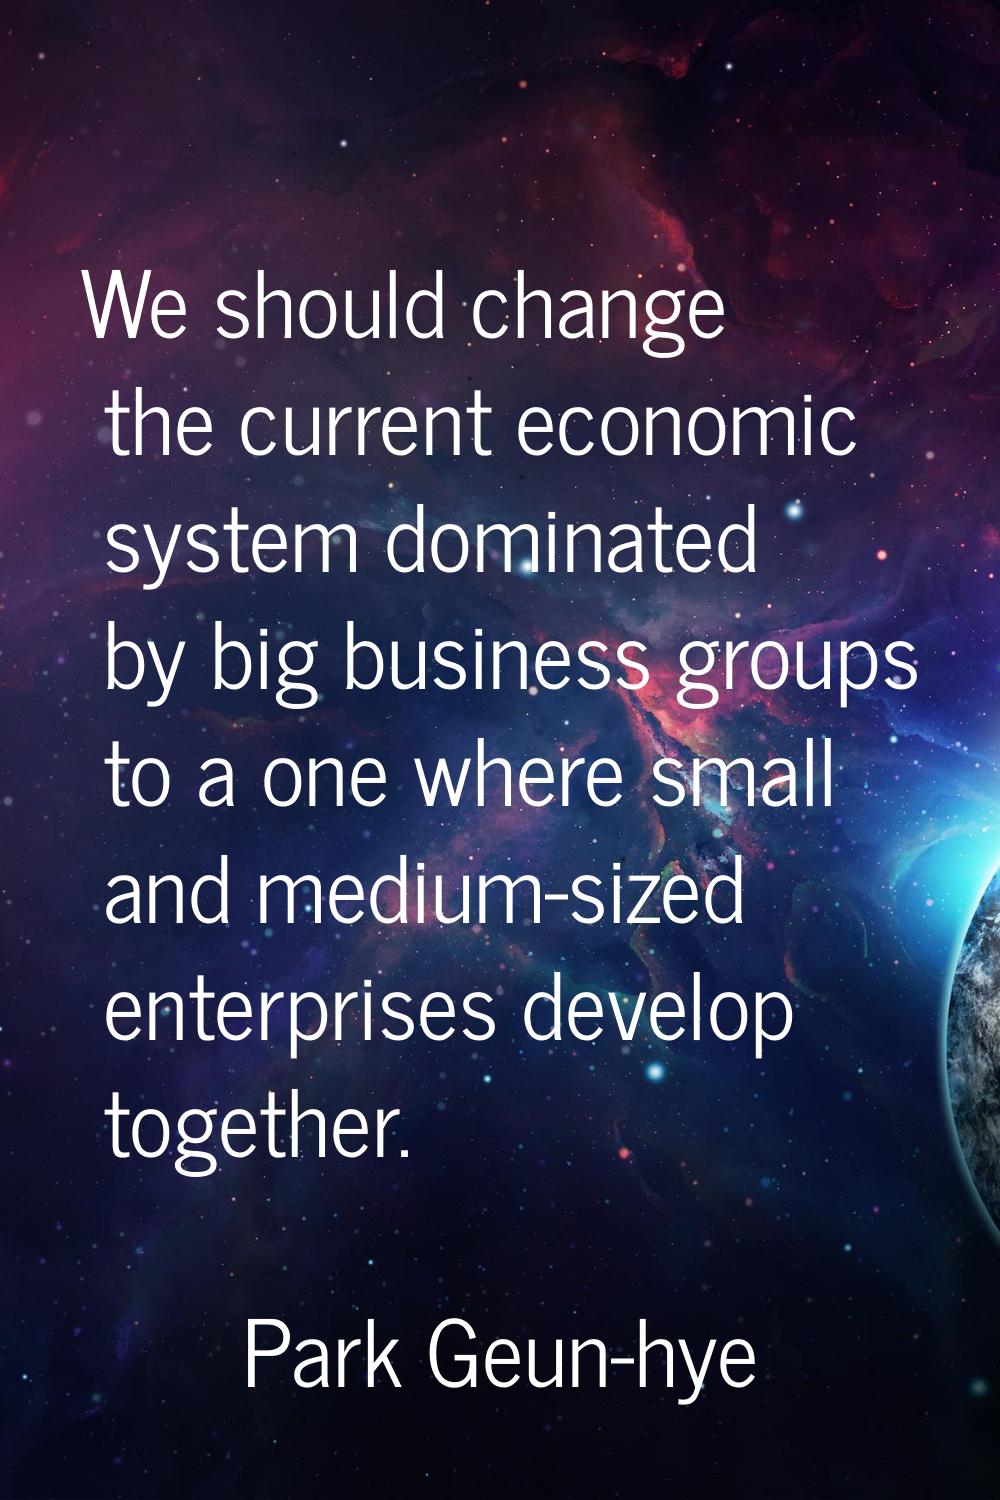 We should change the current economic system dominated by big business groups to a one where small 